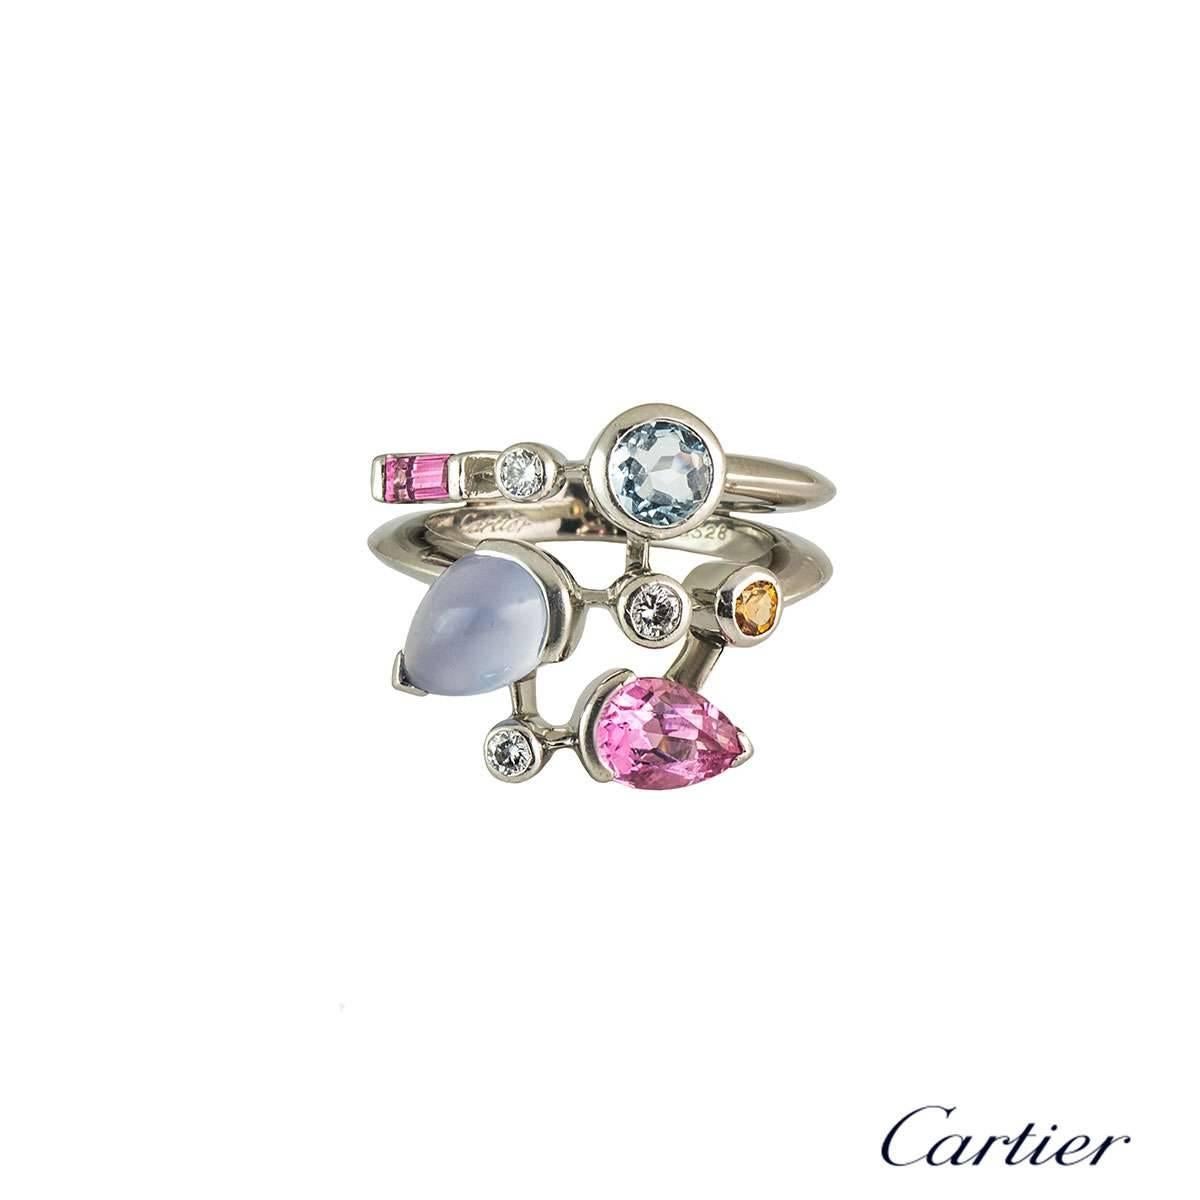 A trendy 18k white gold Cartier diamond and multi-gemstone ring from the Meli Melo collection. The ring comprises of 8 gemstones abstractly placed over 3 rows, consisting of diamonds, aquamarine, chalcedony, garnet and pink tourmaline. There are 3